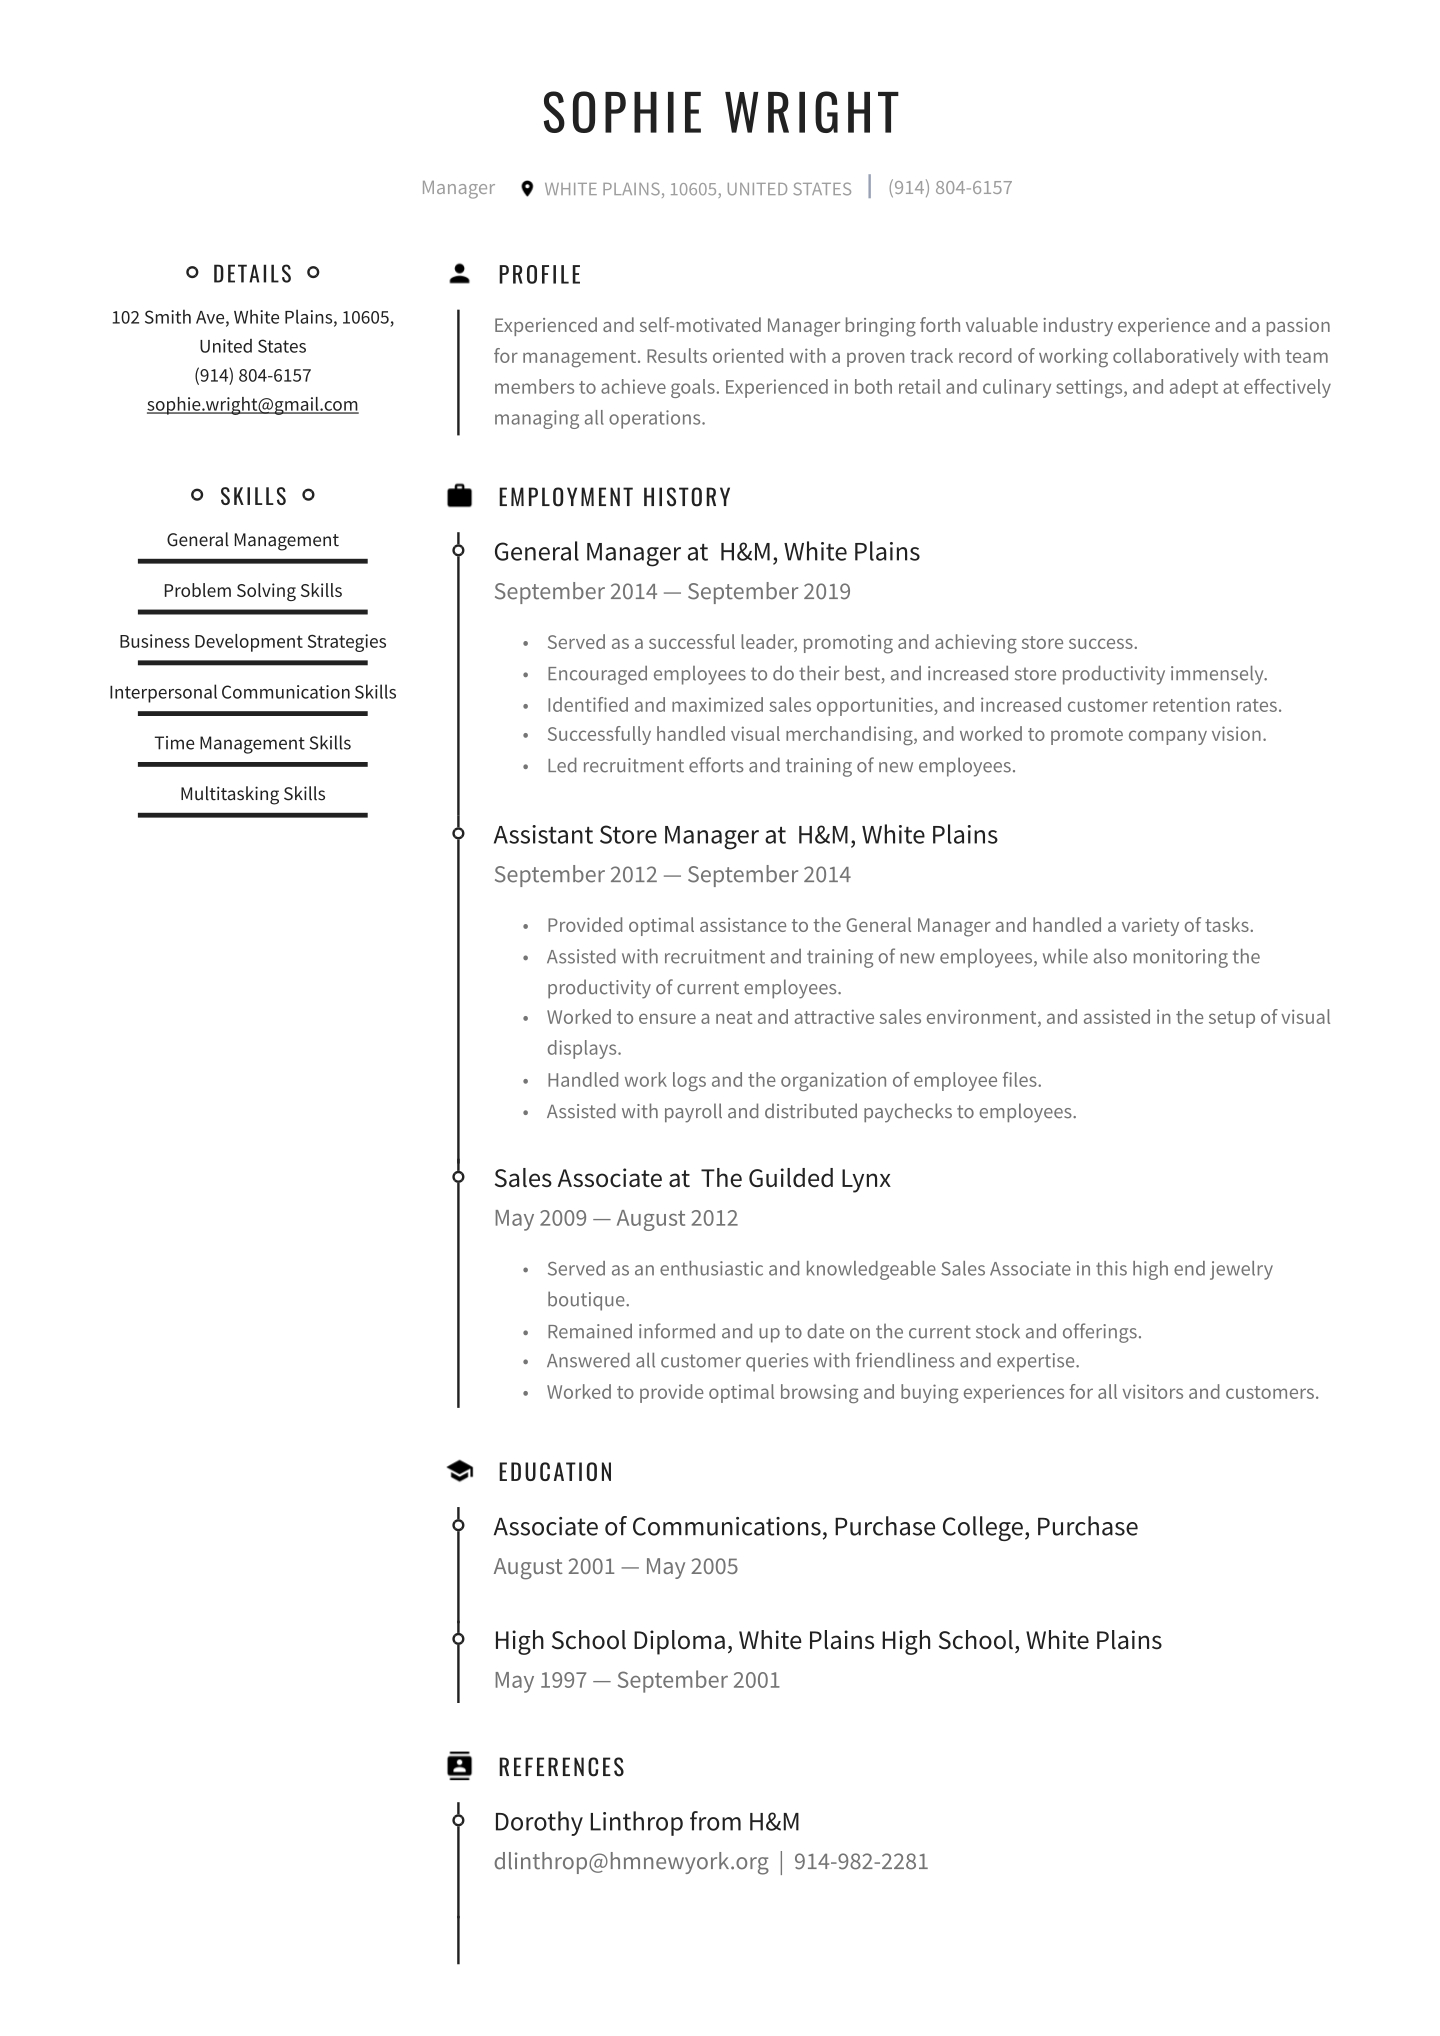 Manager Resume Examples Writing Tips 2020 Free Guide in measurements 1440 X 2036